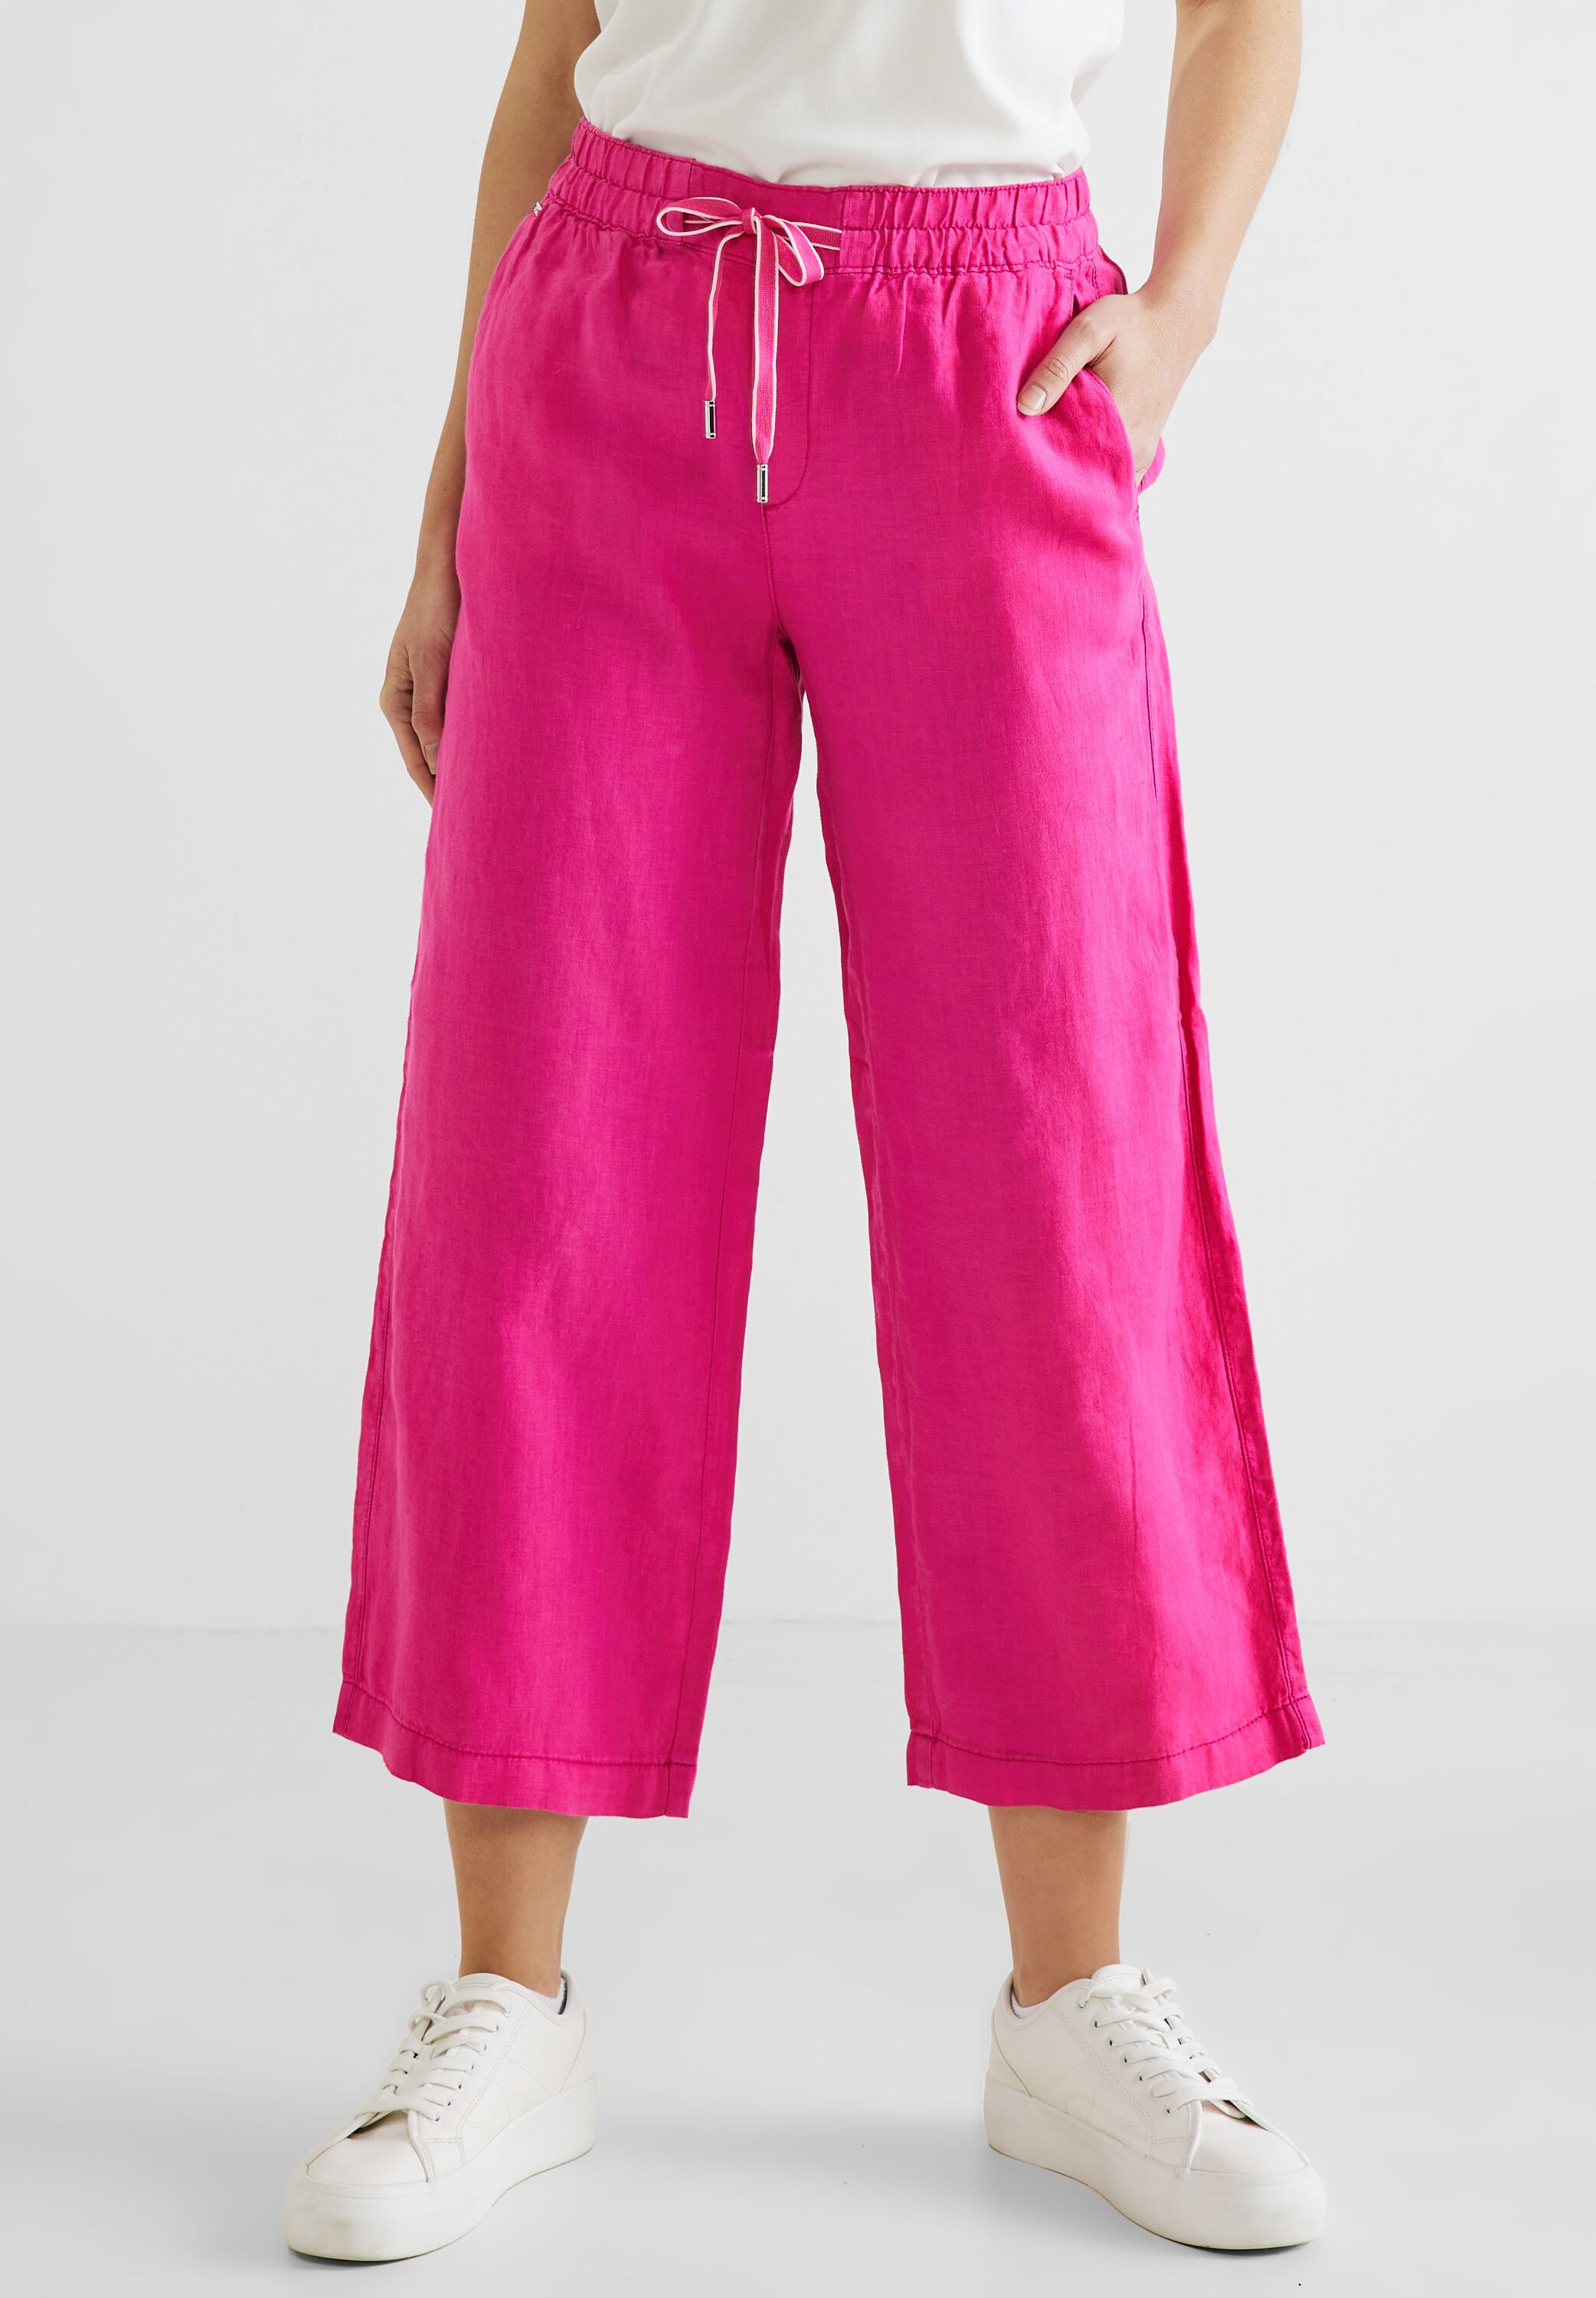 Street One Culotte Emee in Oasis Pink im SALE reduziert A376152-14507 -  CONCEPT Mode